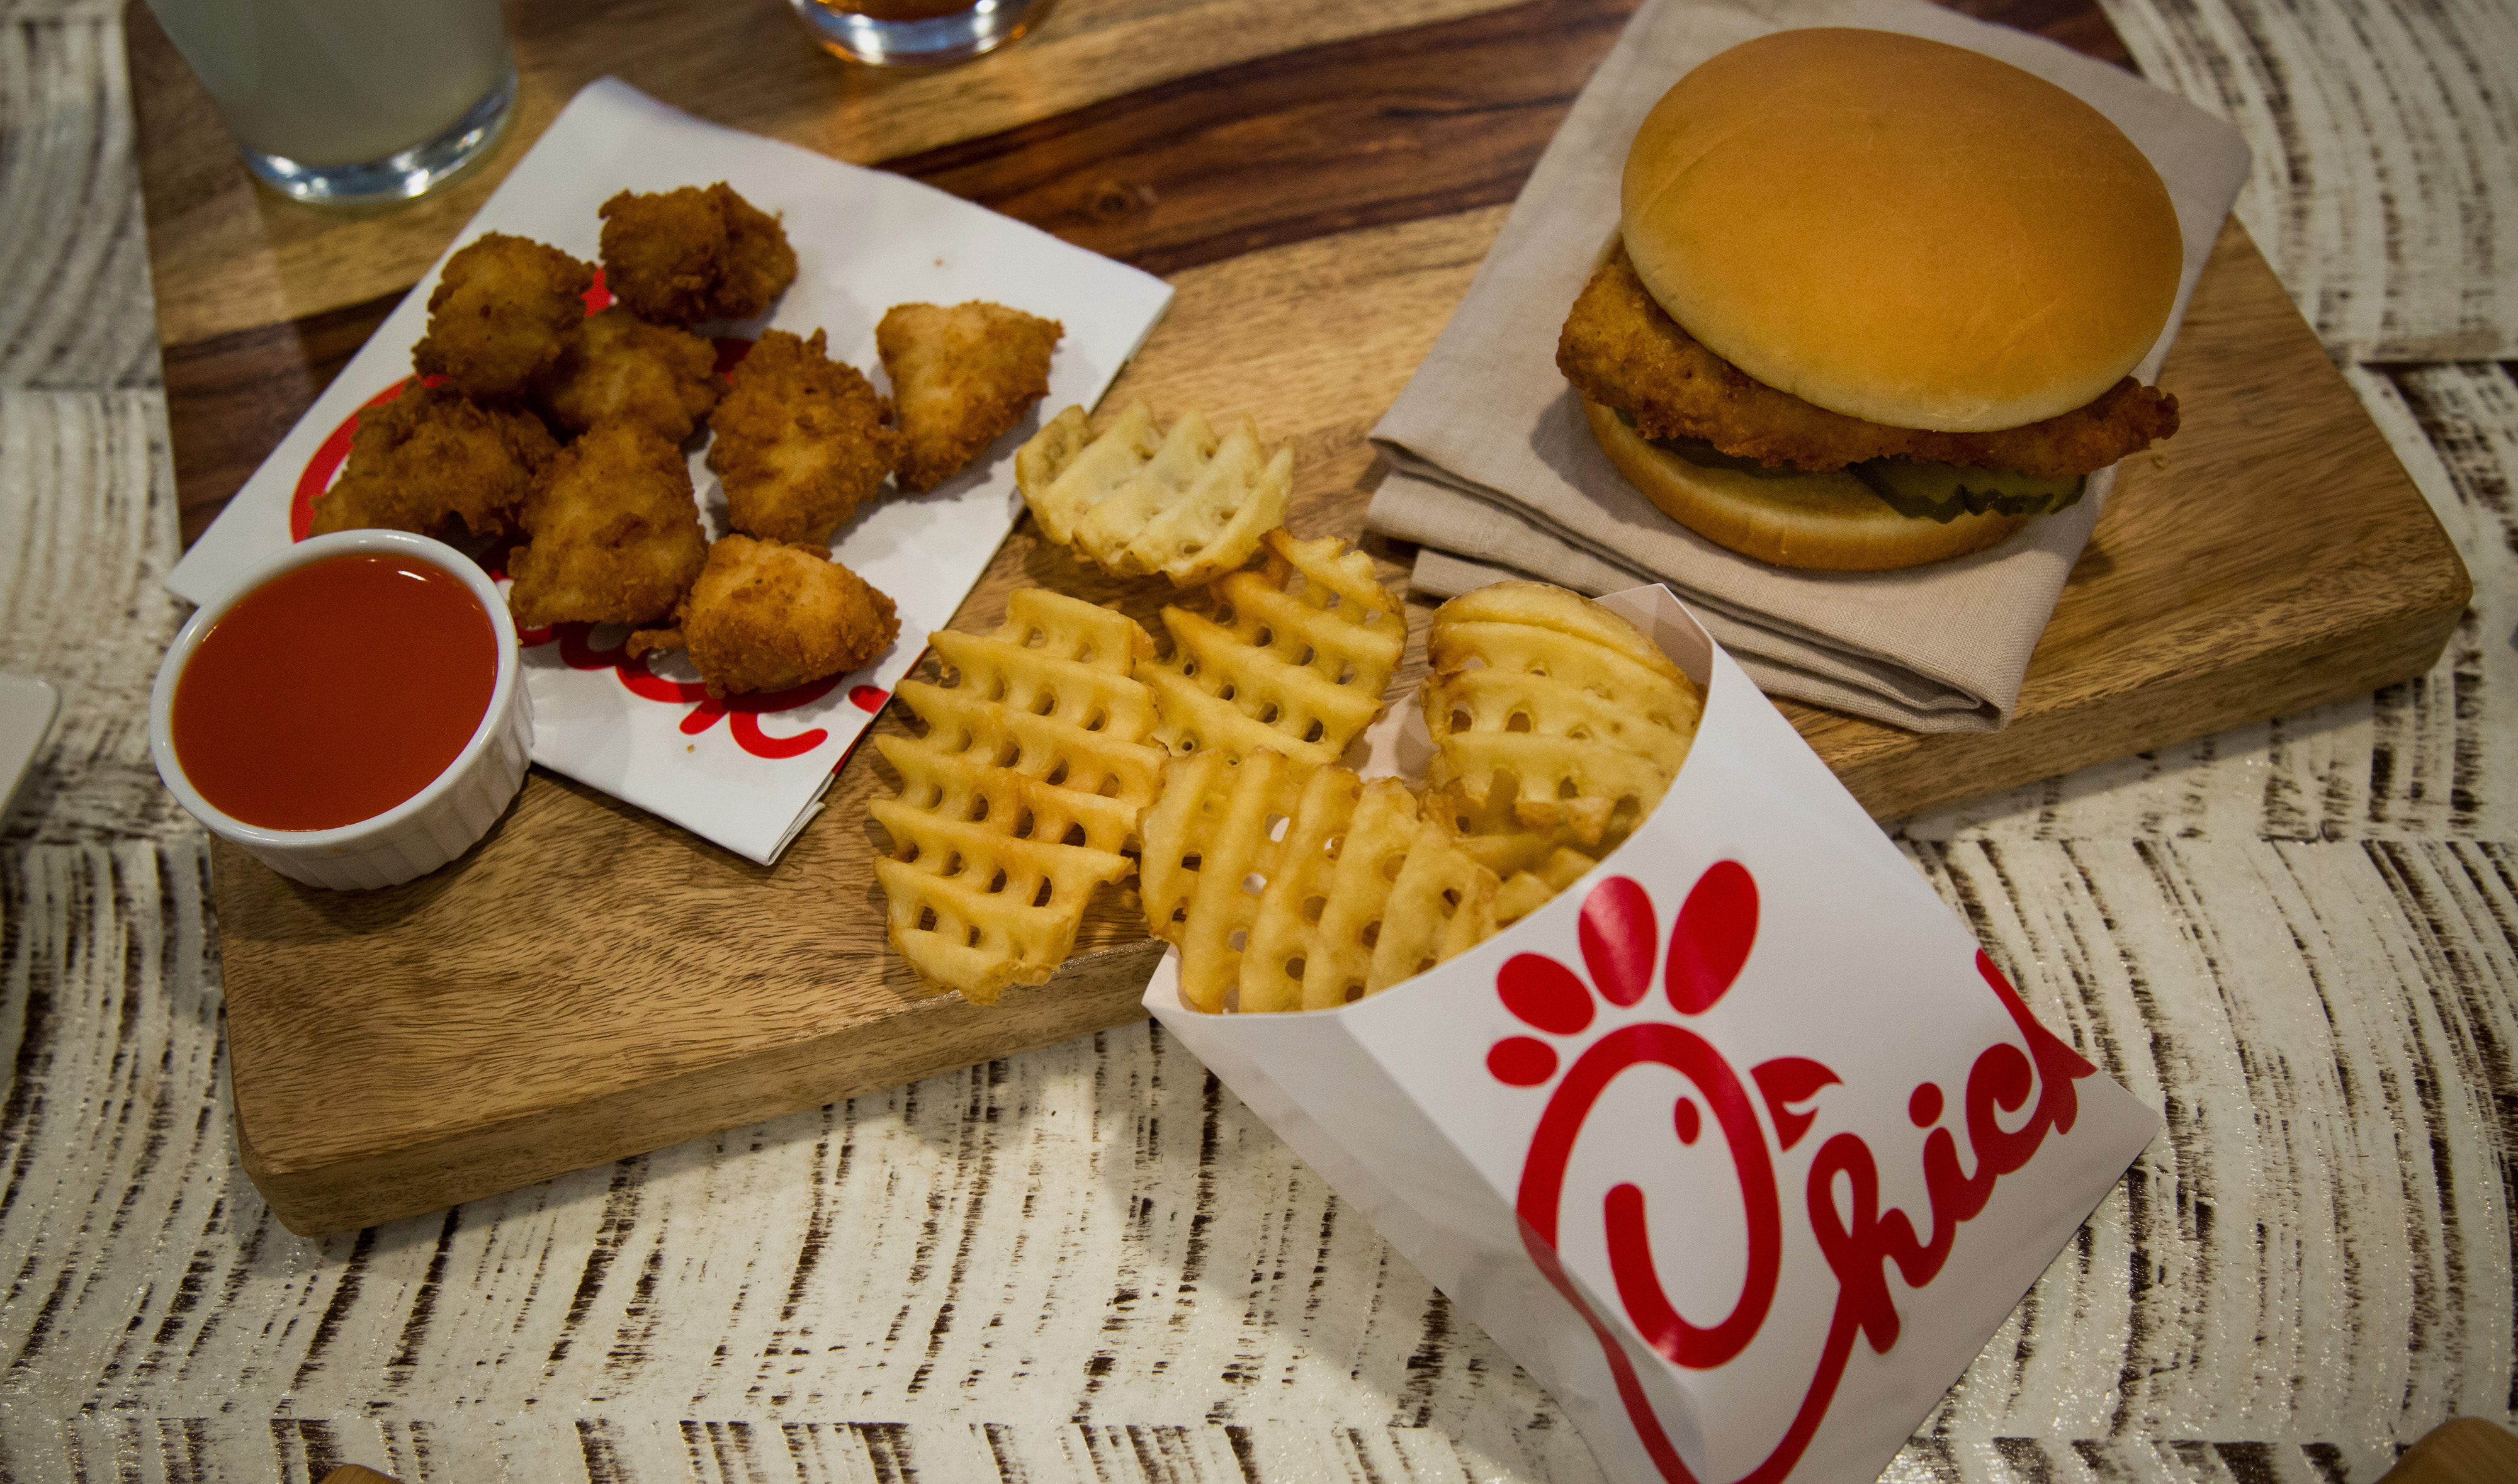 Chicken nuggets, french fries, and a fried chicken sandwich are arranged for a photograph during an event ahead of the grand opening for a Chick-fil-A restaurant in New York, U.S., on Friday, Oct. 2, 2015. (Michael Nagle—Bloomberg/Getty Images)